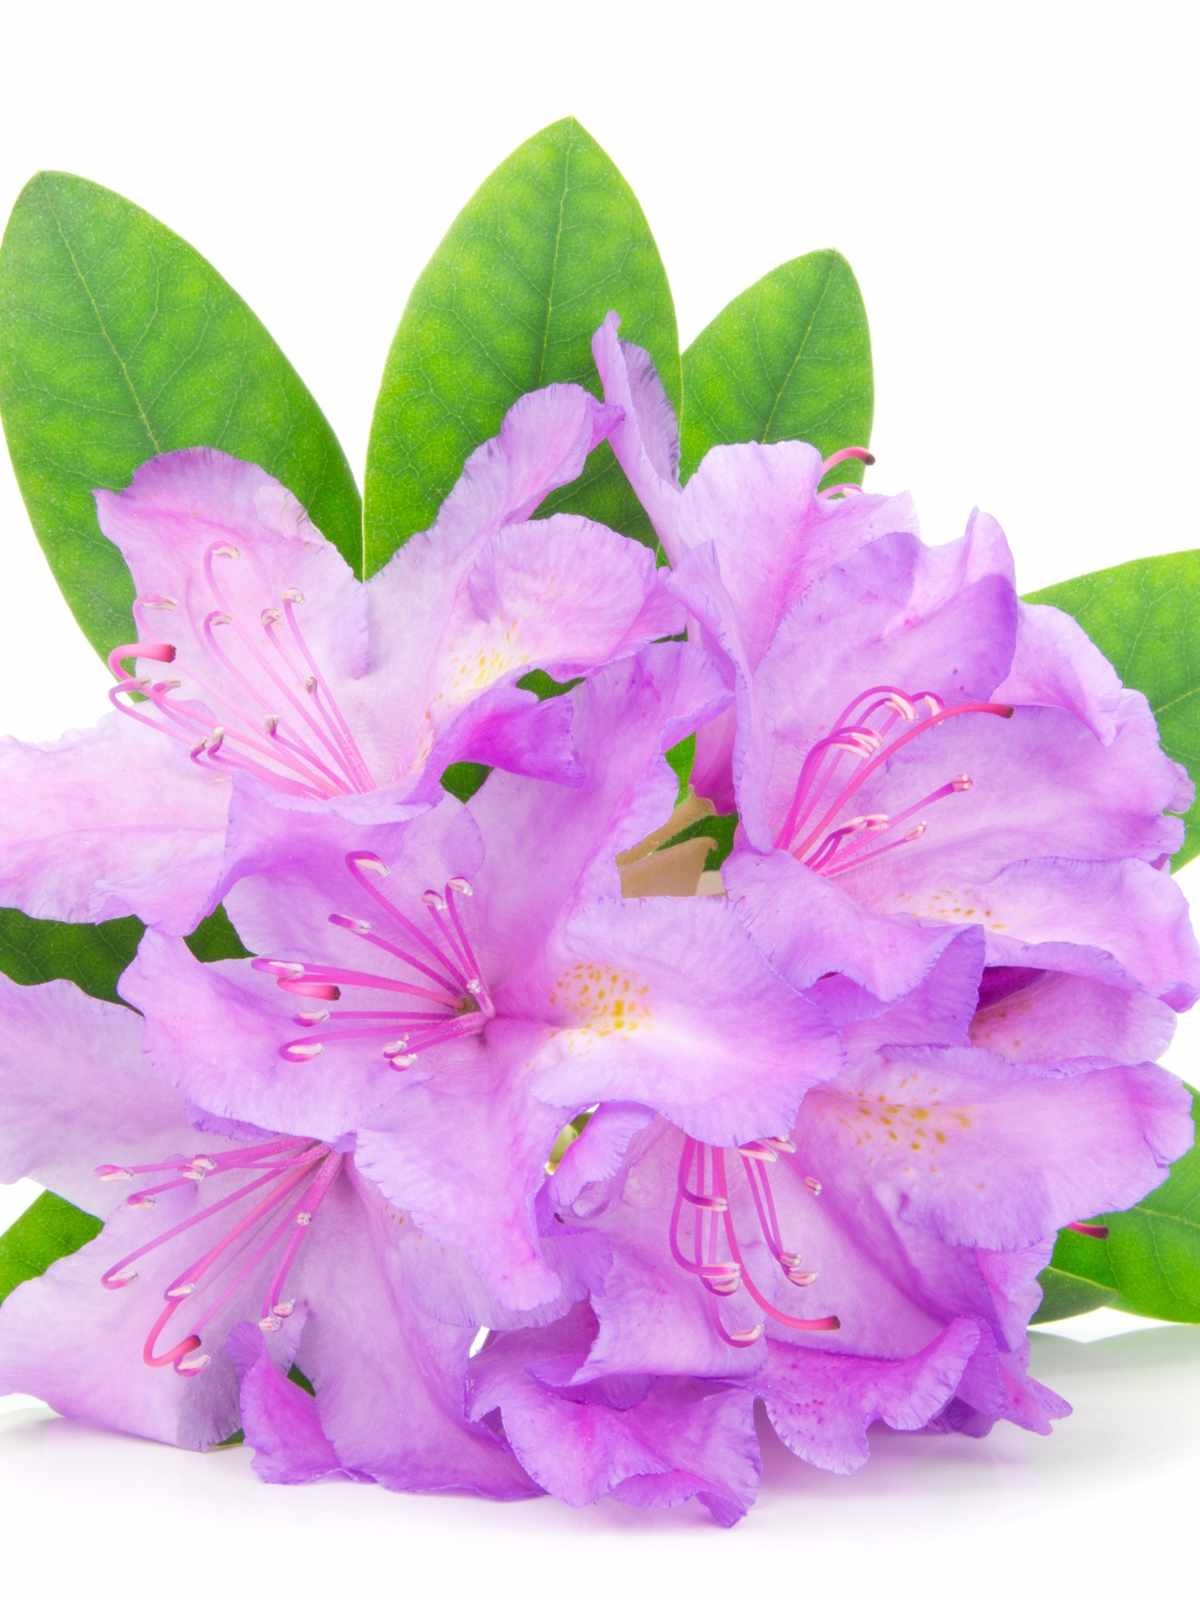 tips and tricks on caring for rhododendron